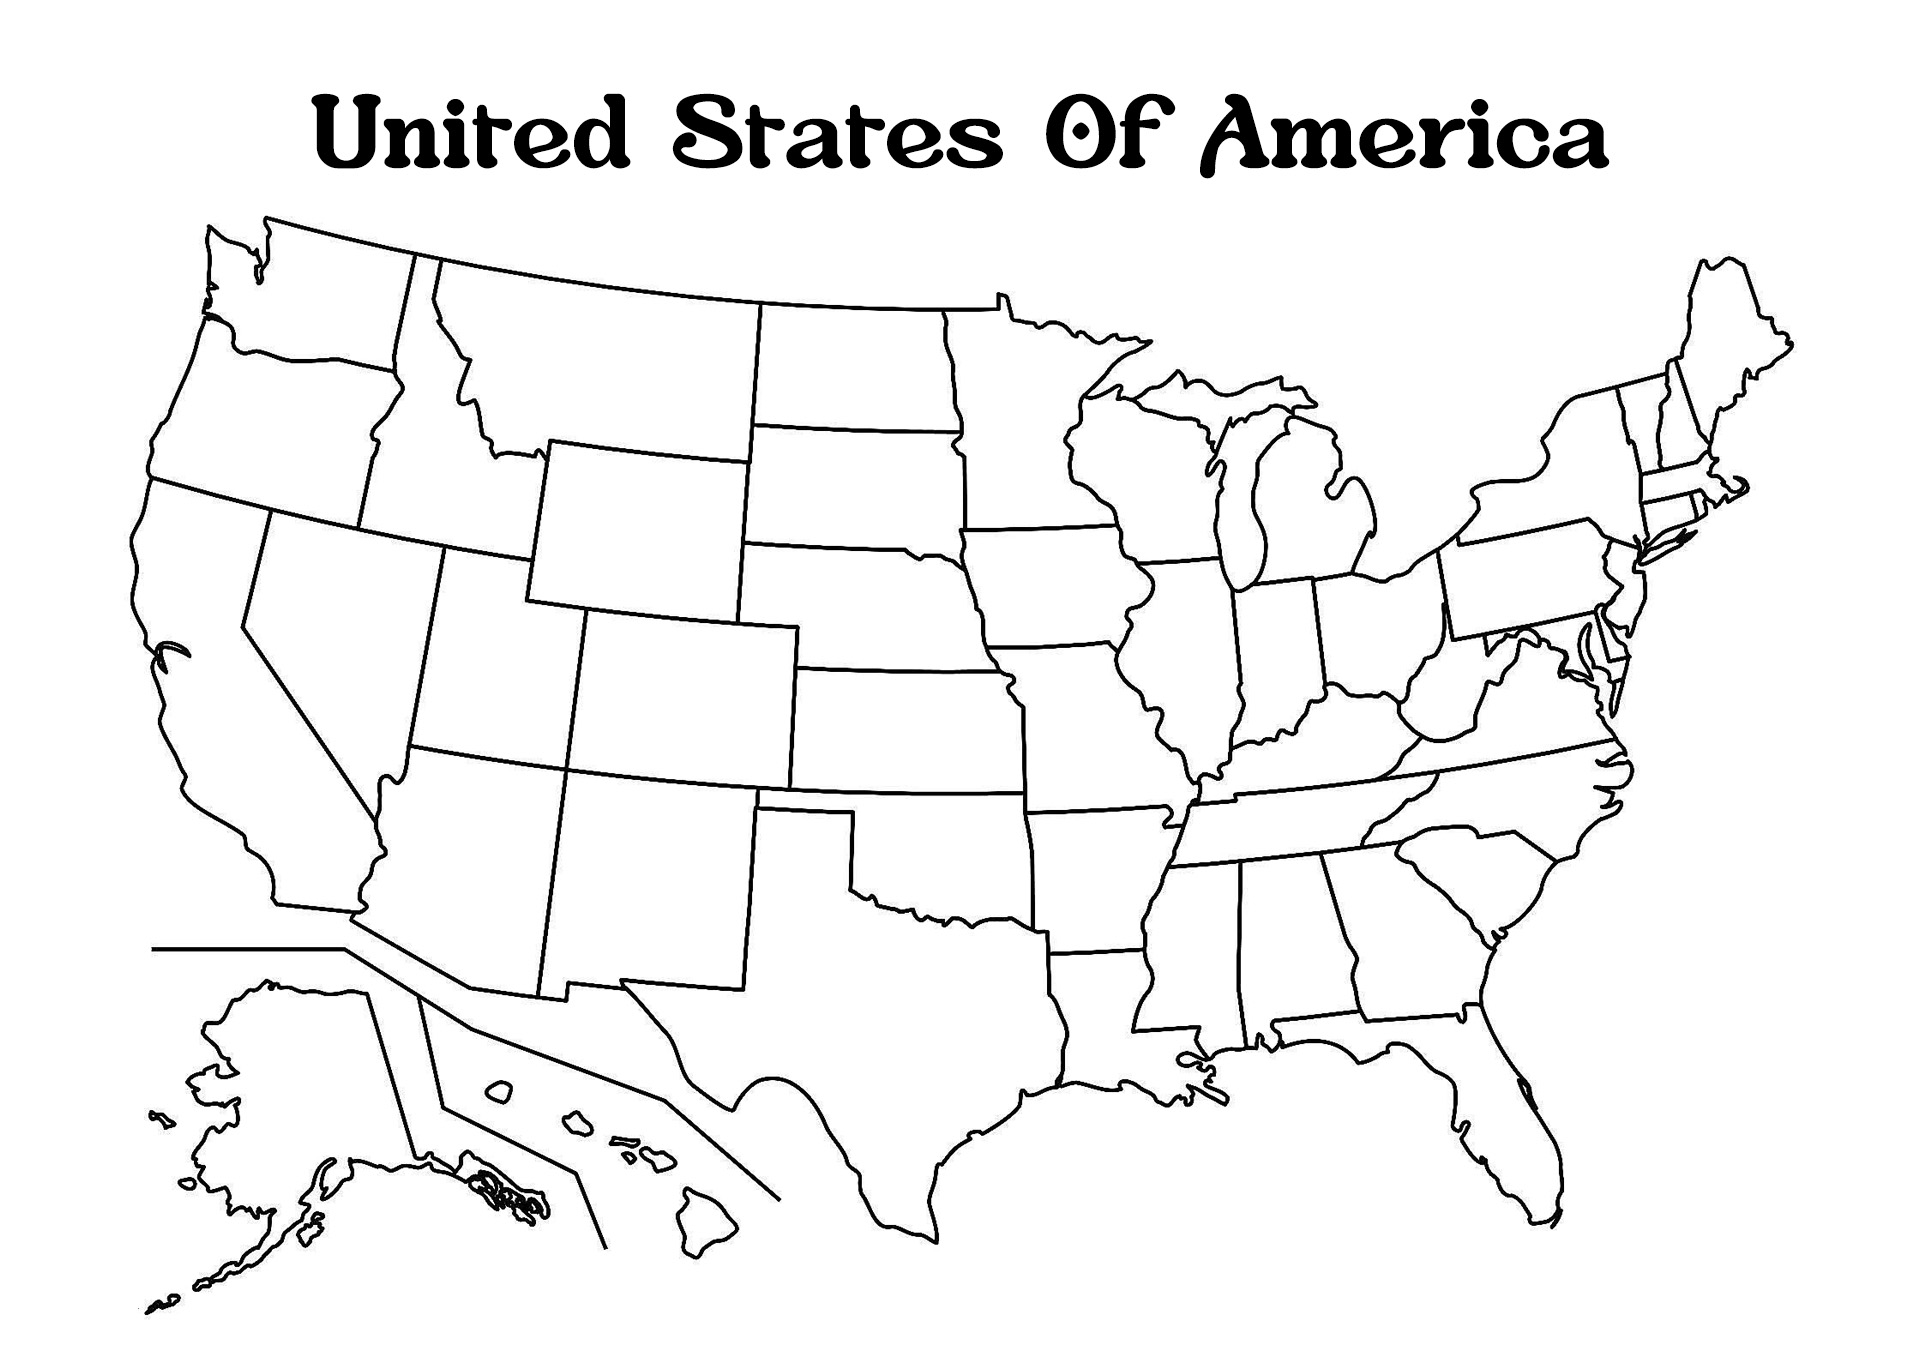 United States of America Map Coloring Page Image